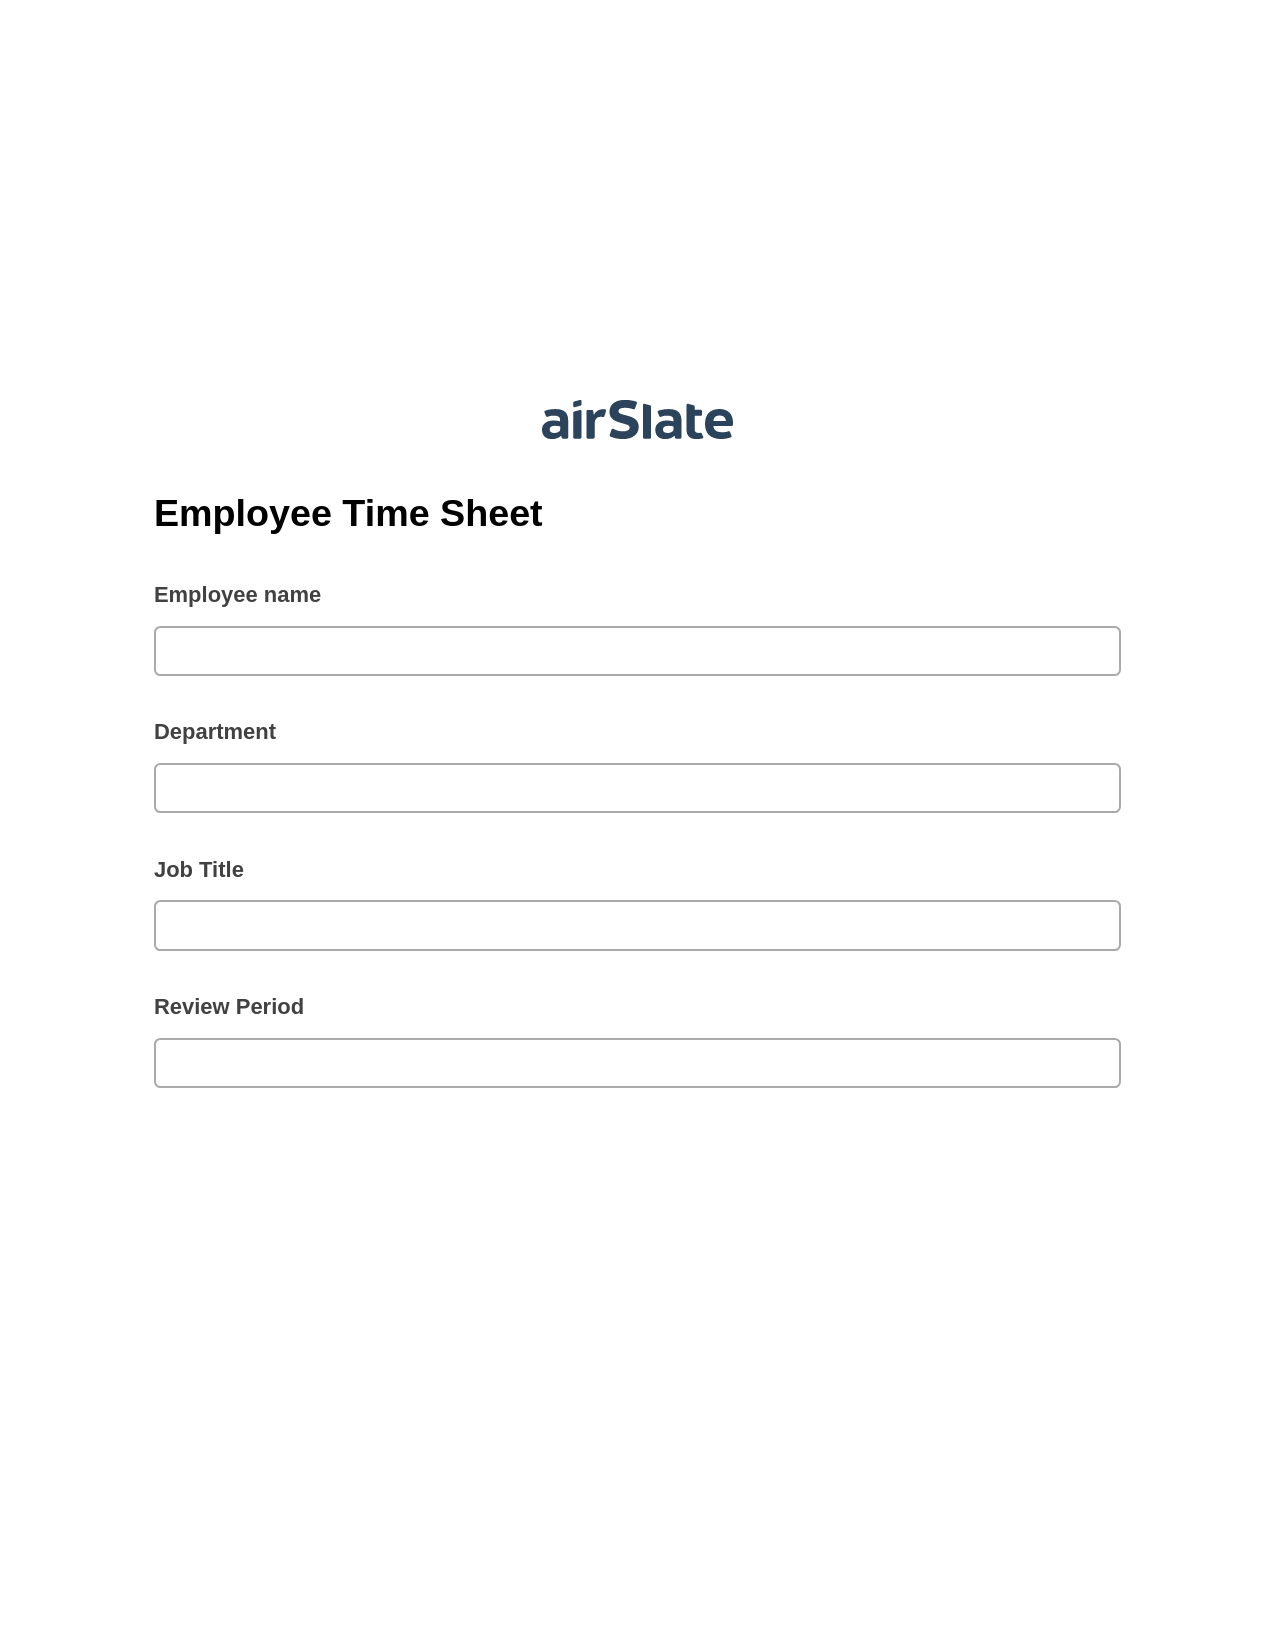 Employee Time Sheet Pre-fill from Smartsheet Bot, Update Audit Trail Bot, Archive to Google Drive Bot